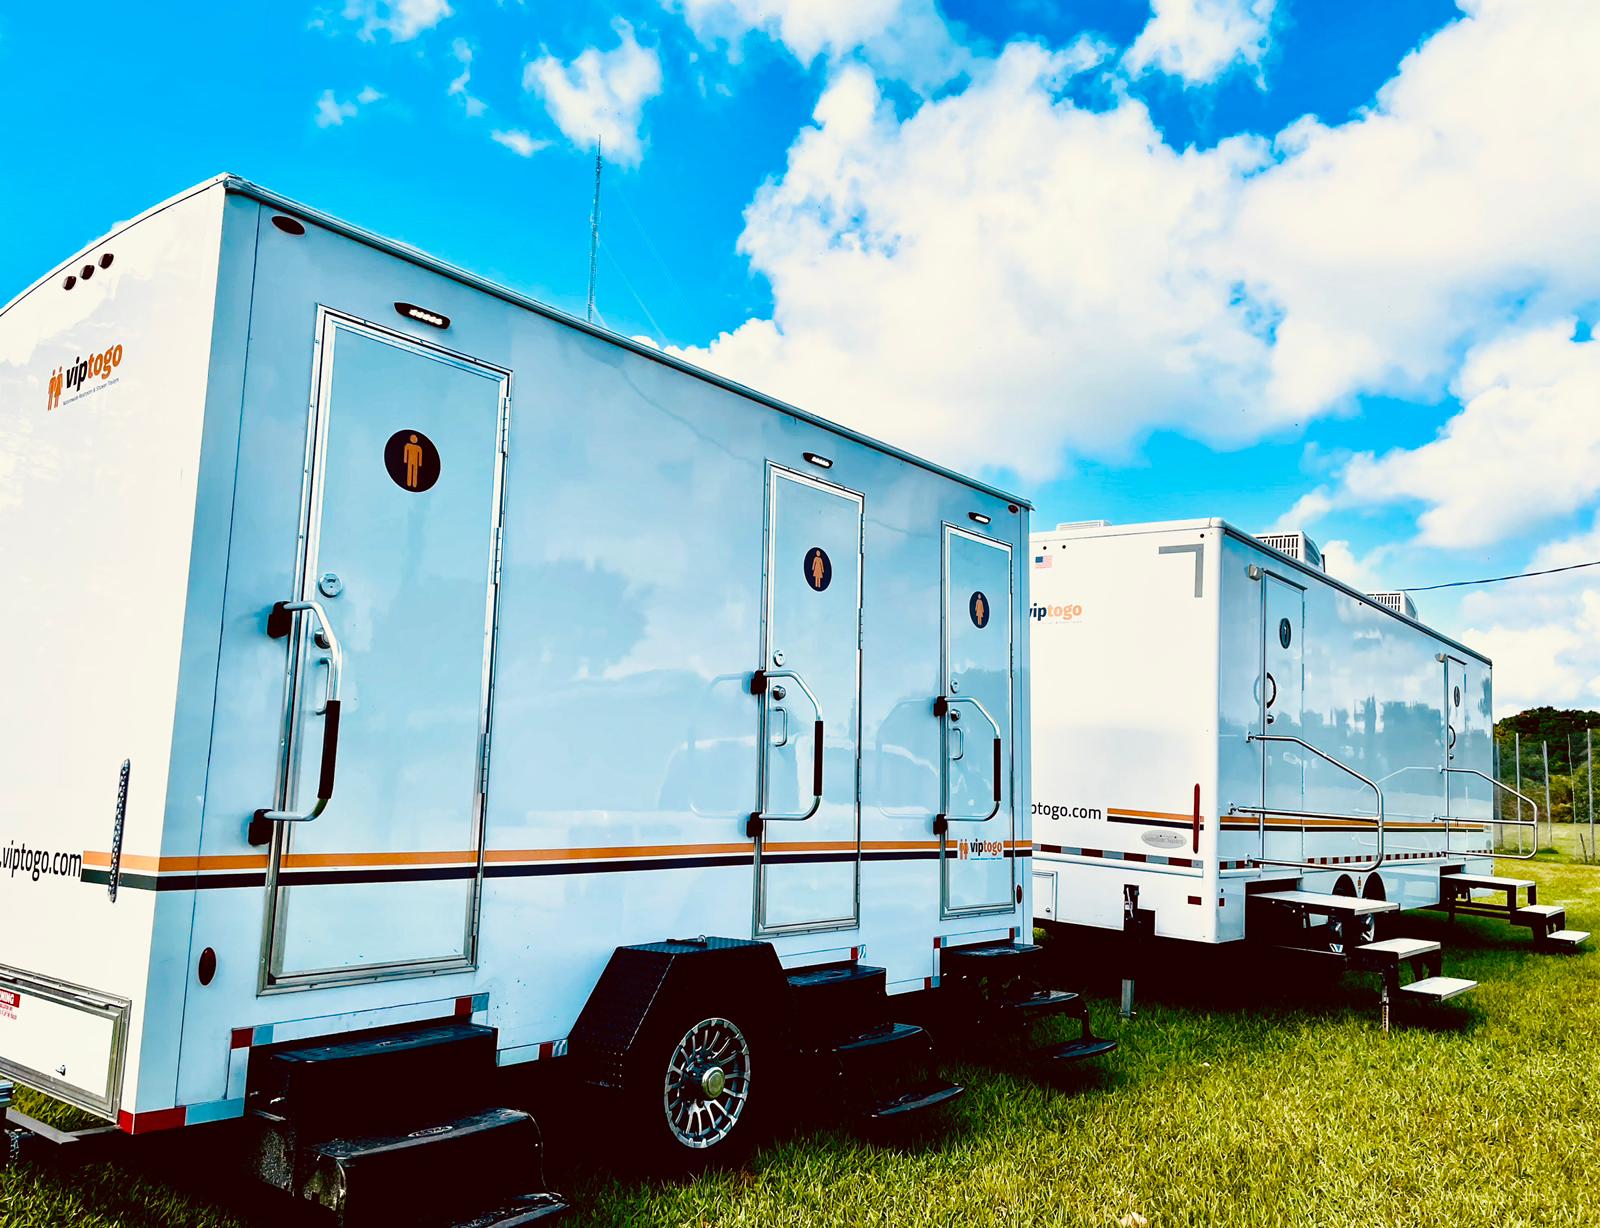 VIP To Go services out of service restroom trailers